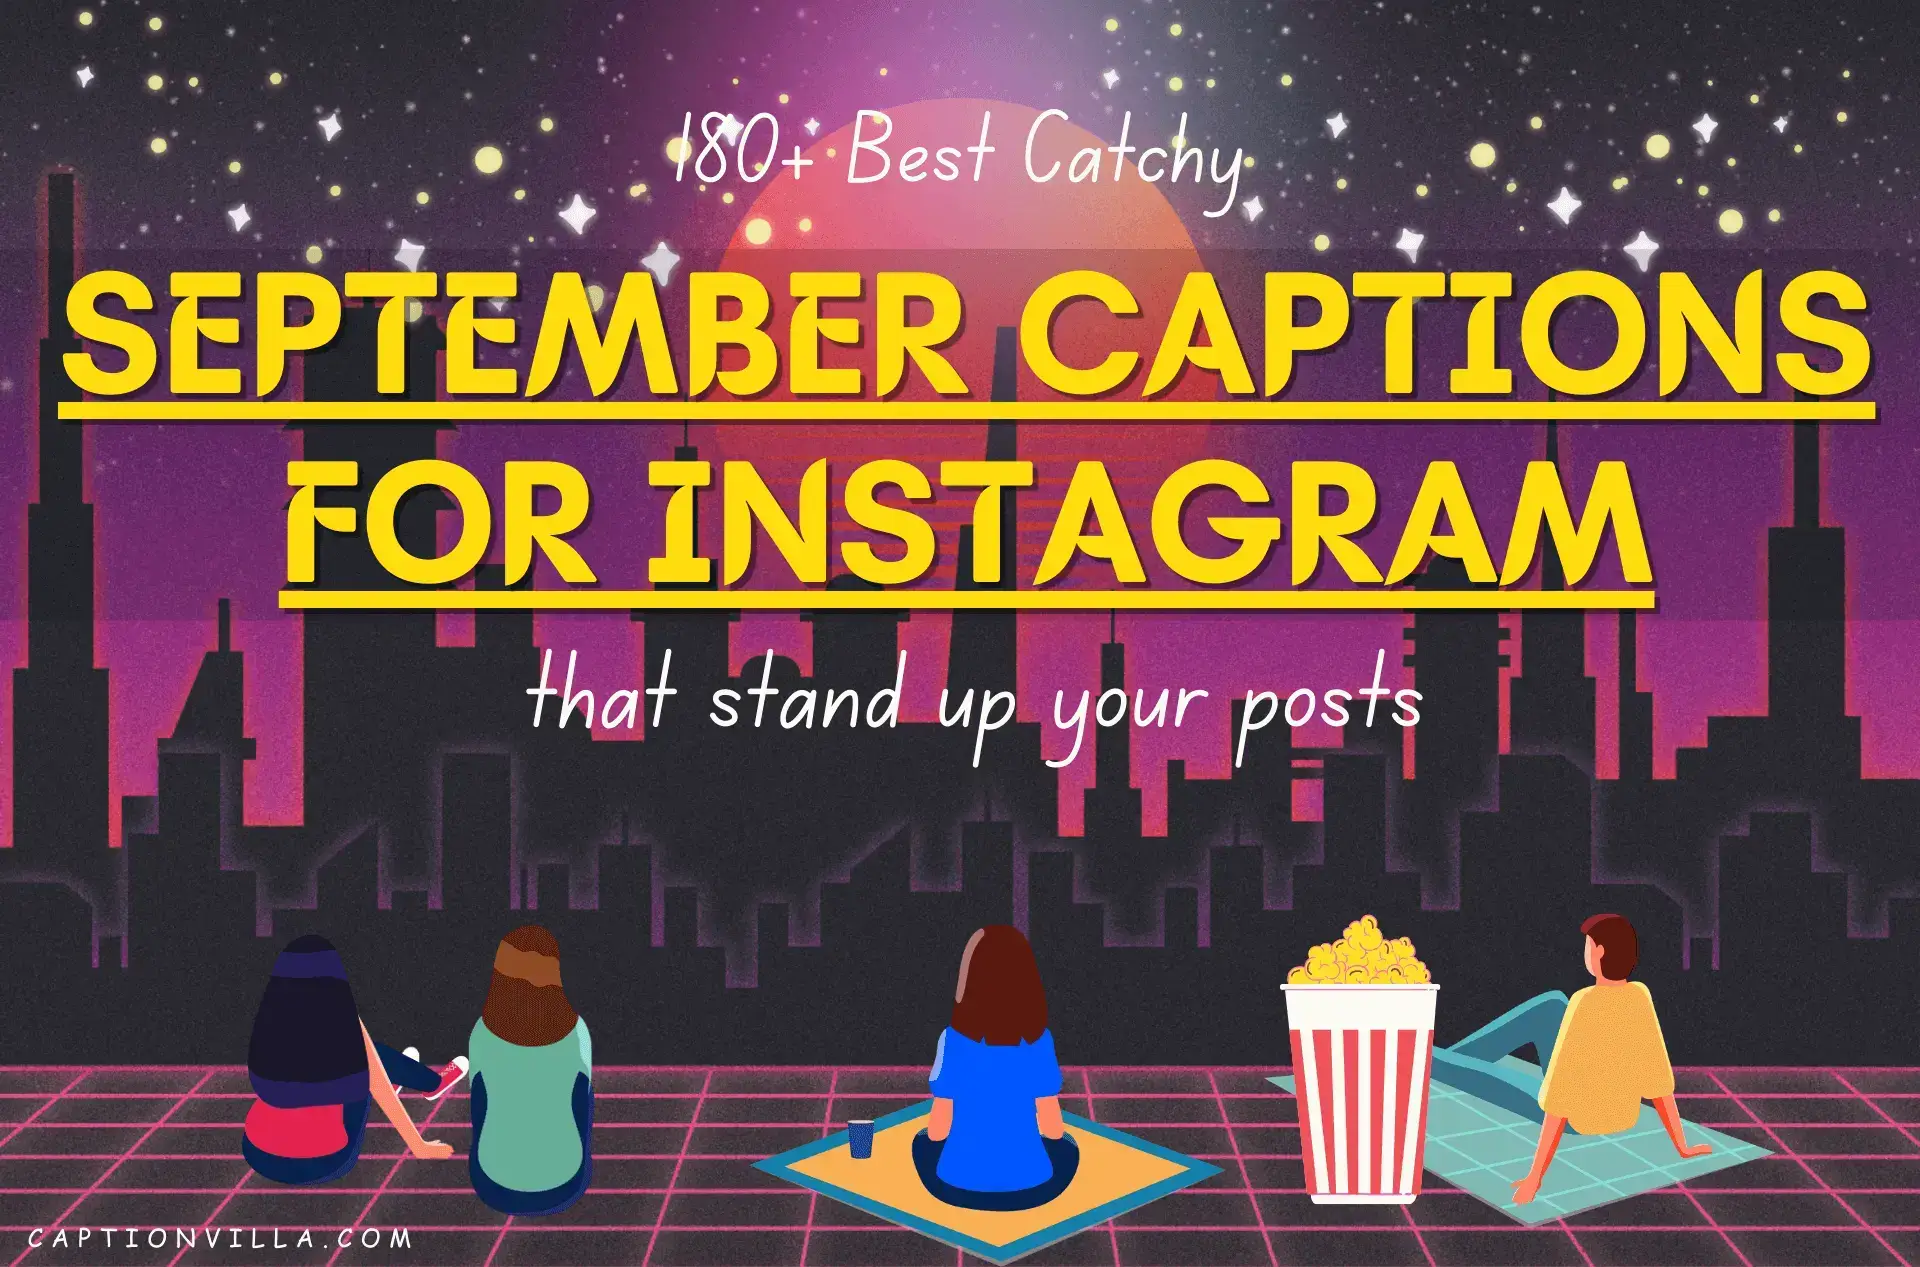 This image contains the title of September Captions for Instagram